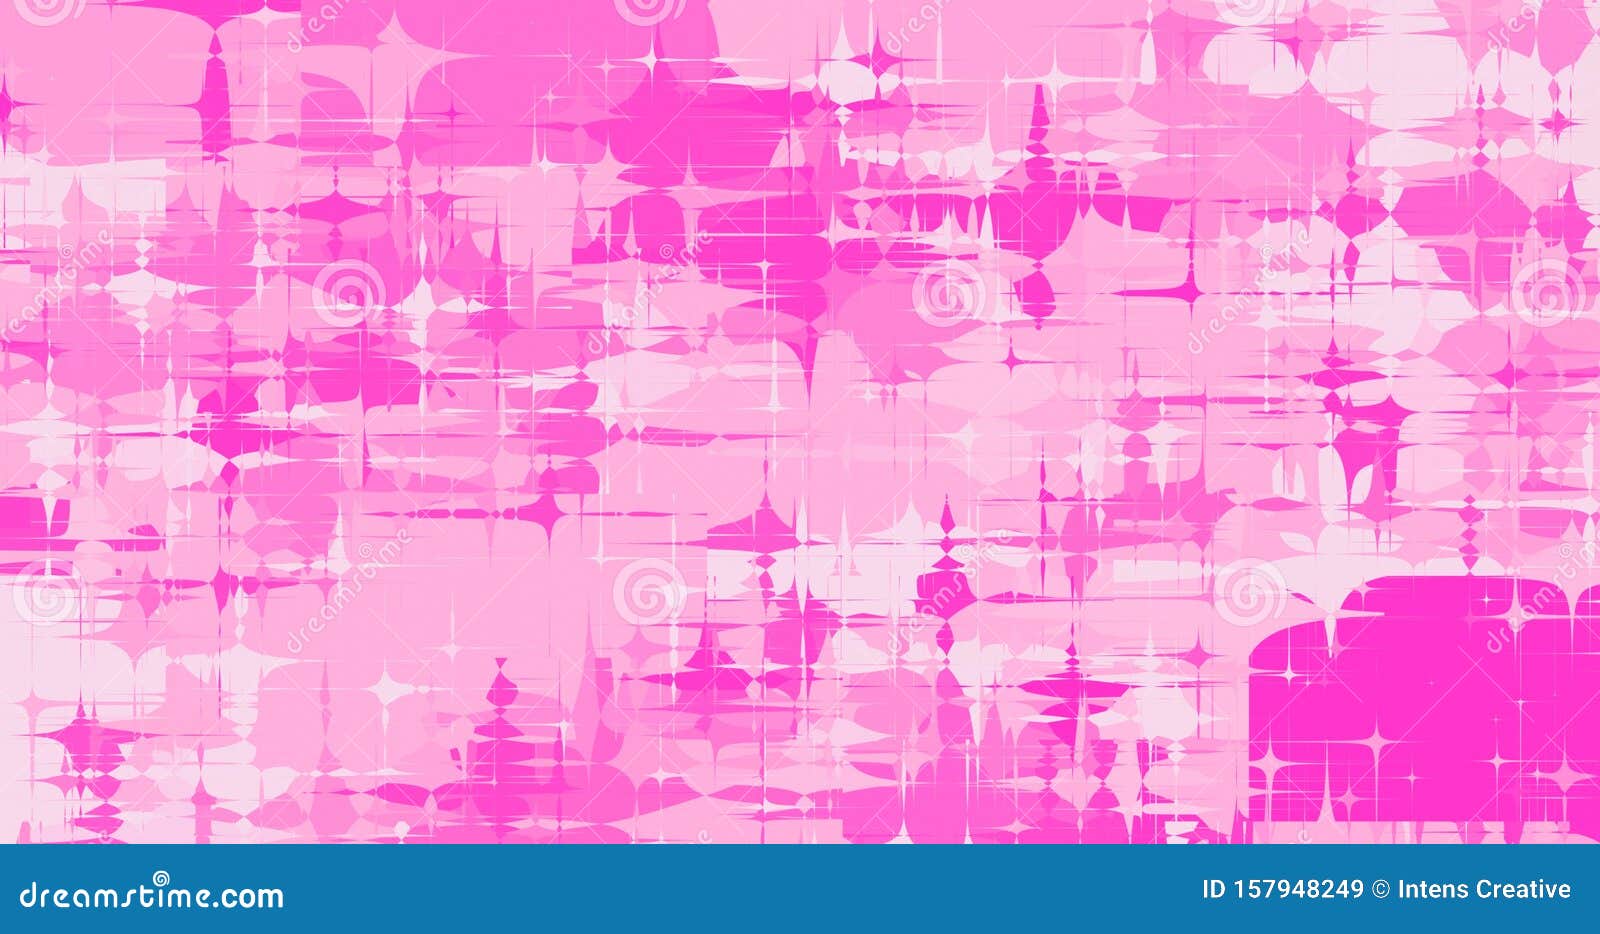 Painting Abstract Colorful Background with Pink Color Theme ...